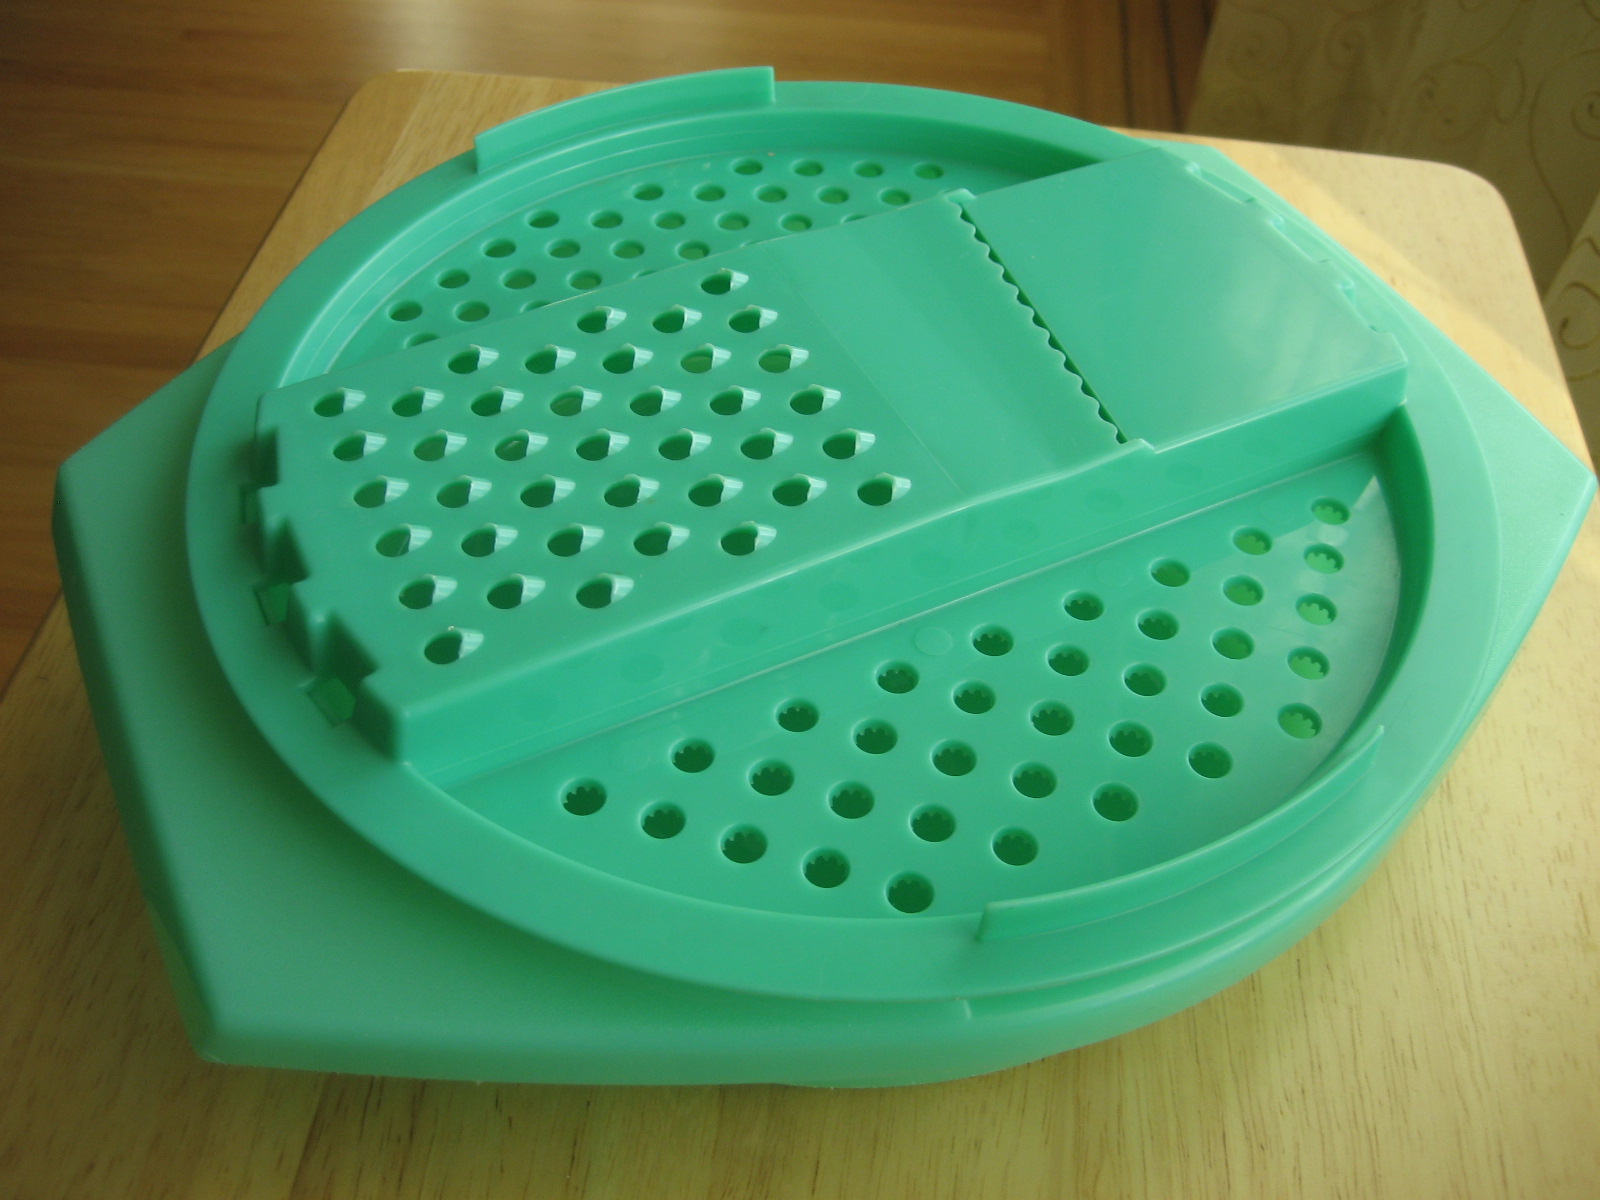 Vintage Tupperware Green 3 piece Grater Set with Storage Bowl & Lid  Directions